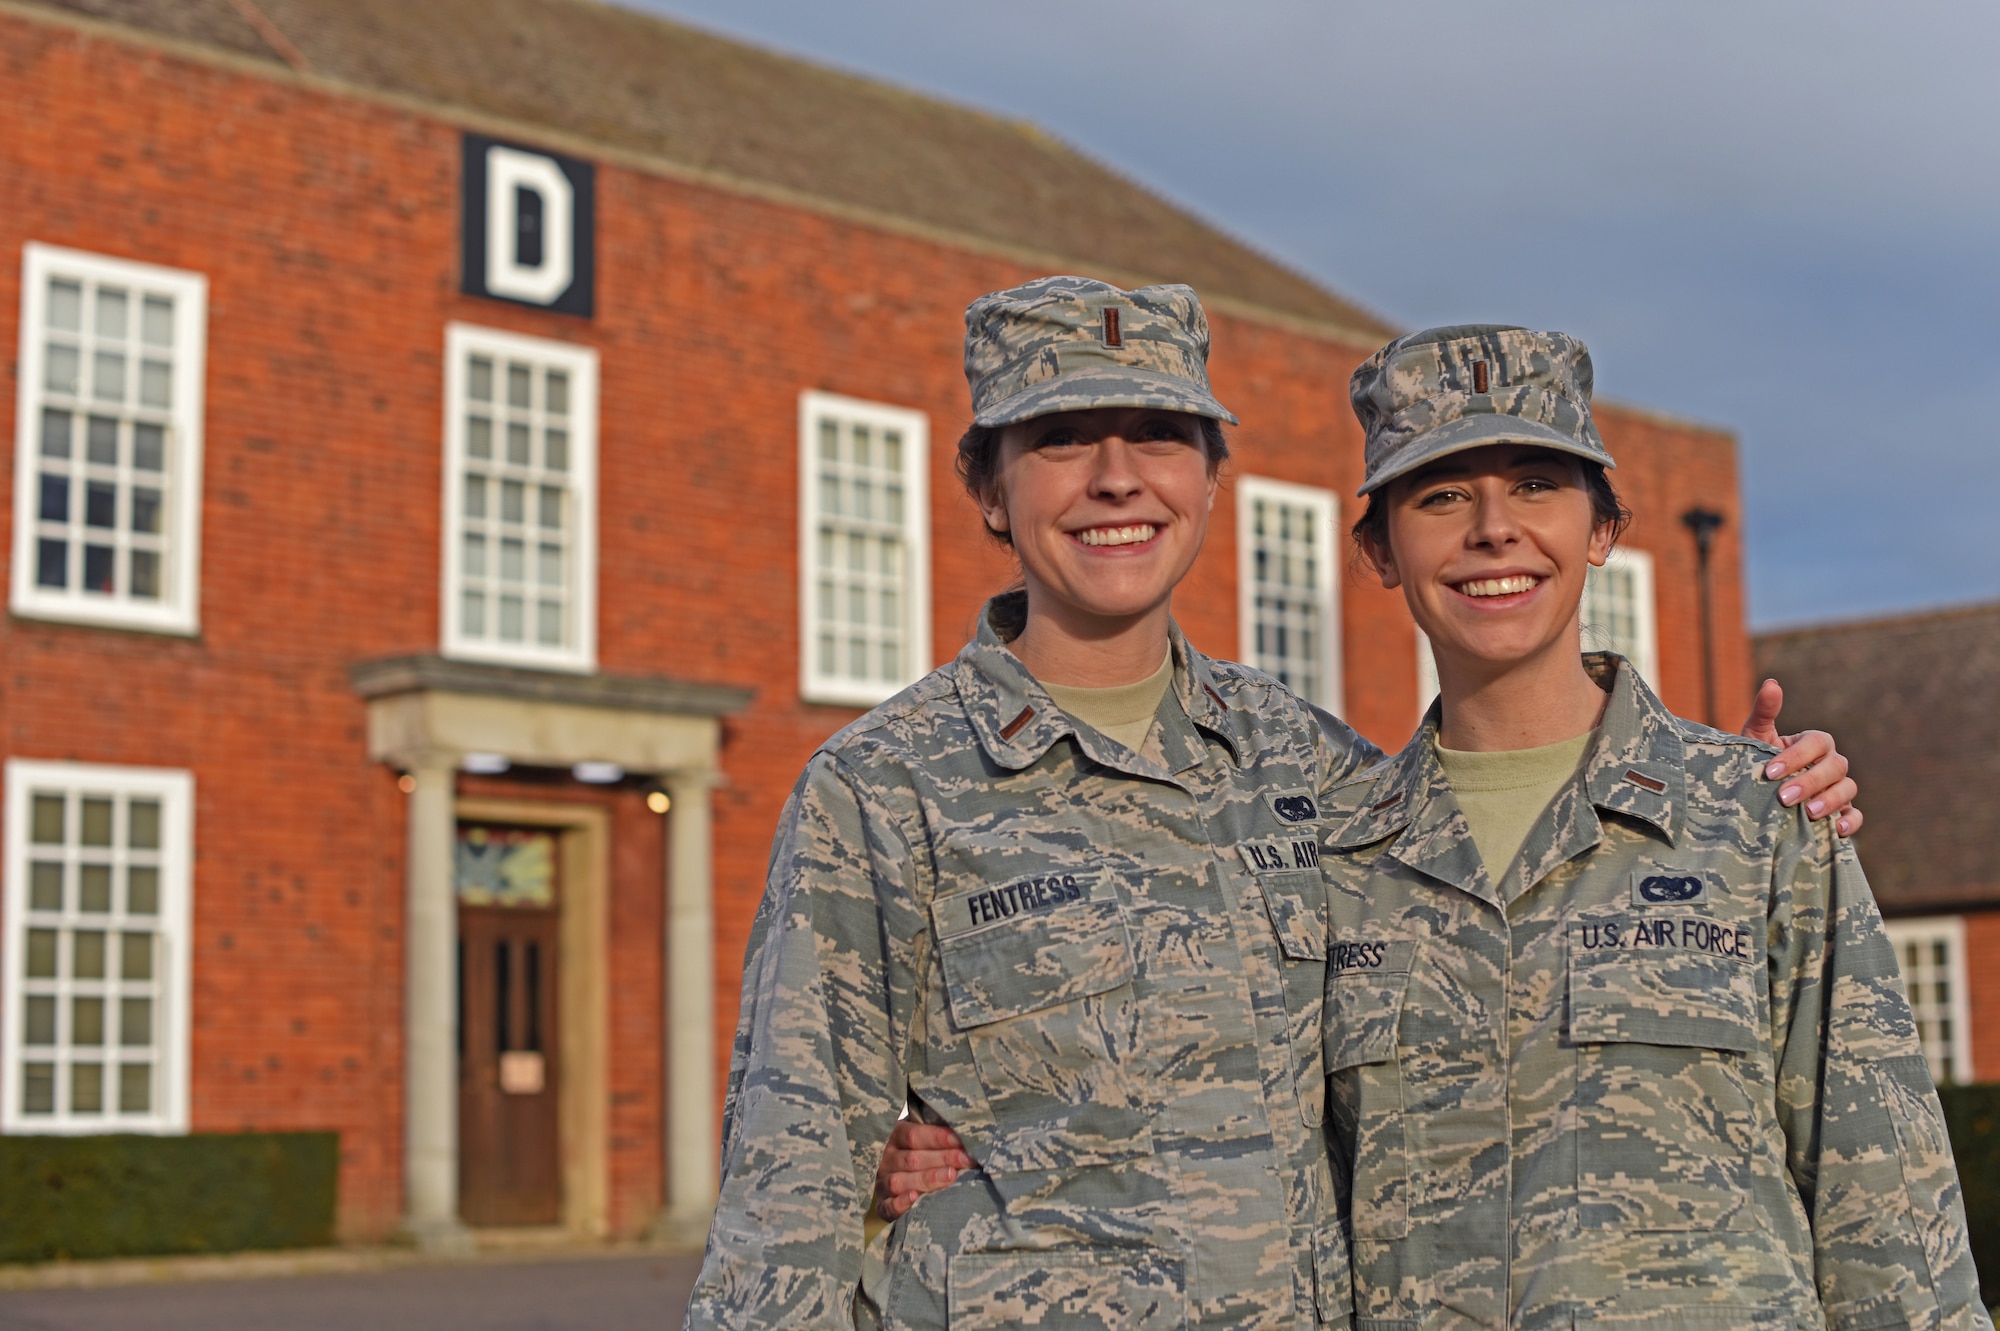 U.S. Air Force 2nd Lt. Reagan Fentress, left, 100th Logistics Readiness Squadron Deployment and Distribution flight commander, and U.S. Air Force 2nd Lt. Blythe Fentress, 727th Air Mobility Squadron Air Terminal Operations Center Officer-in-charge, pose for a photo at RAF Mildenhall, England, Jan. 8, 2019. Reagan attended the U.S. Air Force Academy, while Blythe commissioned after attending the U.S. Merchant Marine Academy in New York.  (U.S. Air Force photo by Airman 1st Class Brandon Esau)